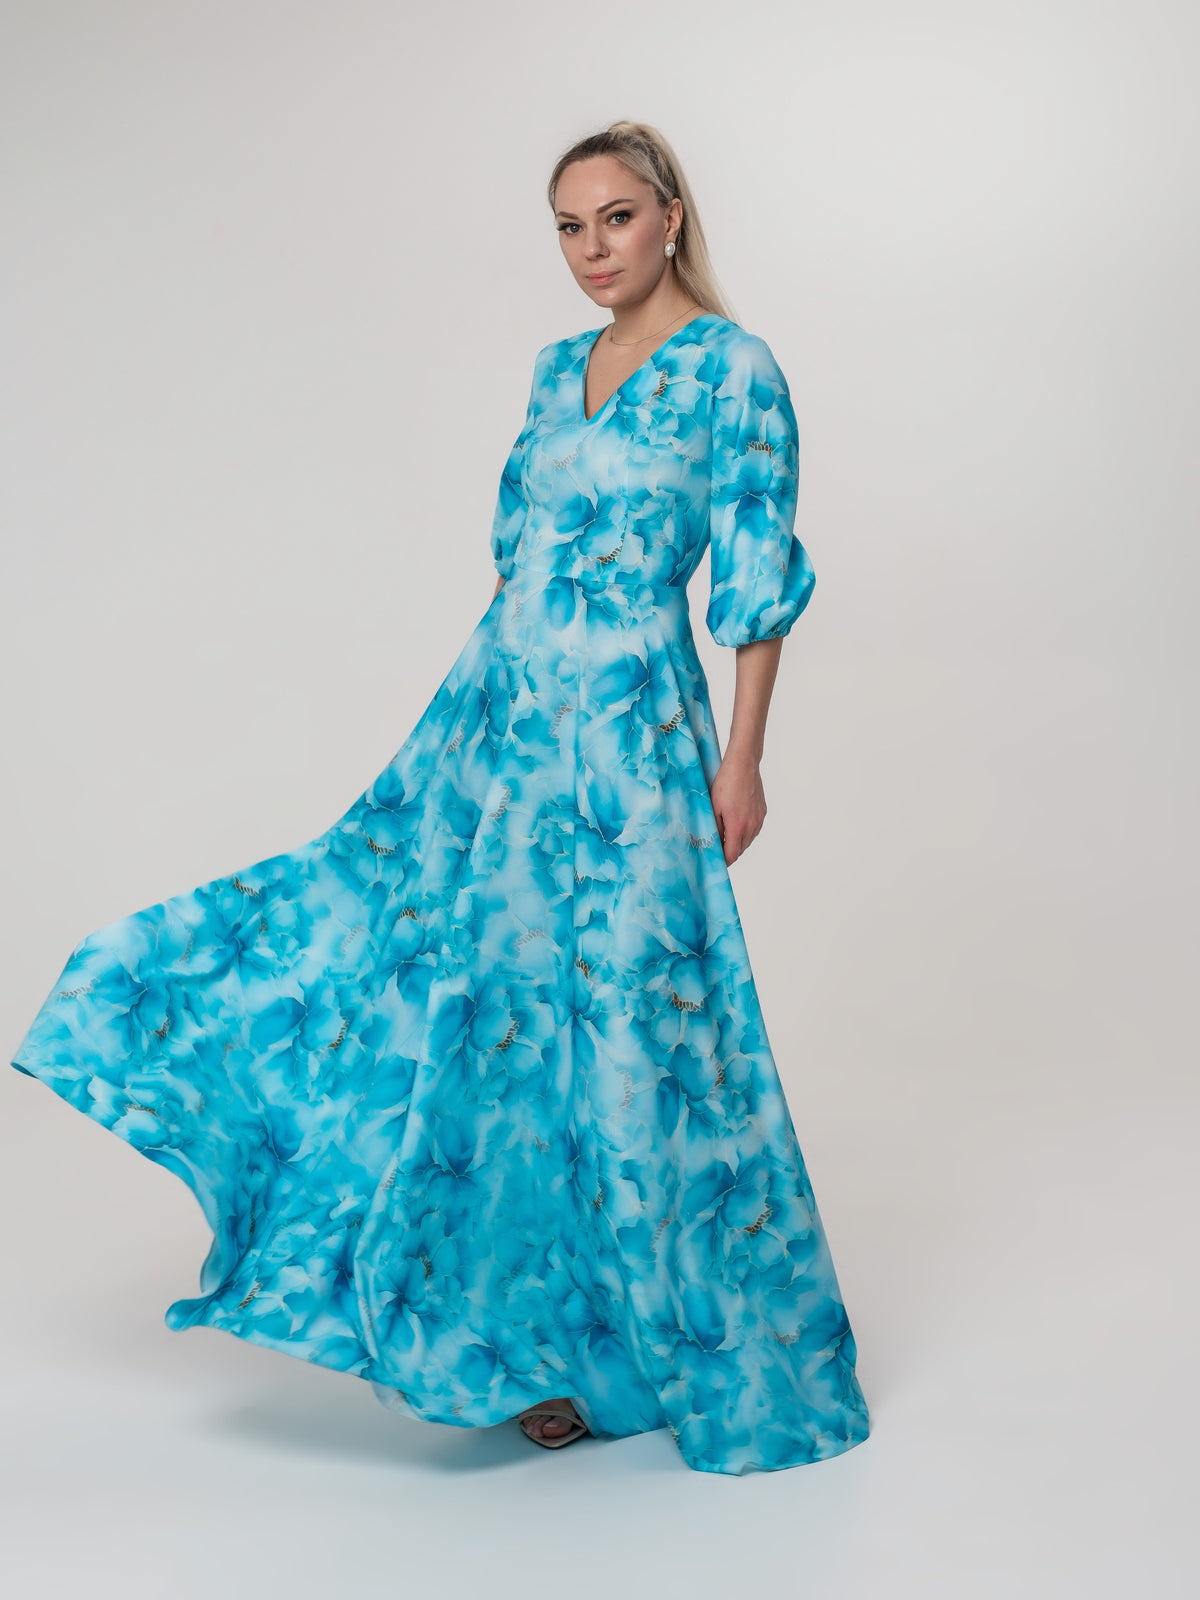 Long light blue dresses with flower pattern, 3/4 Sleeves